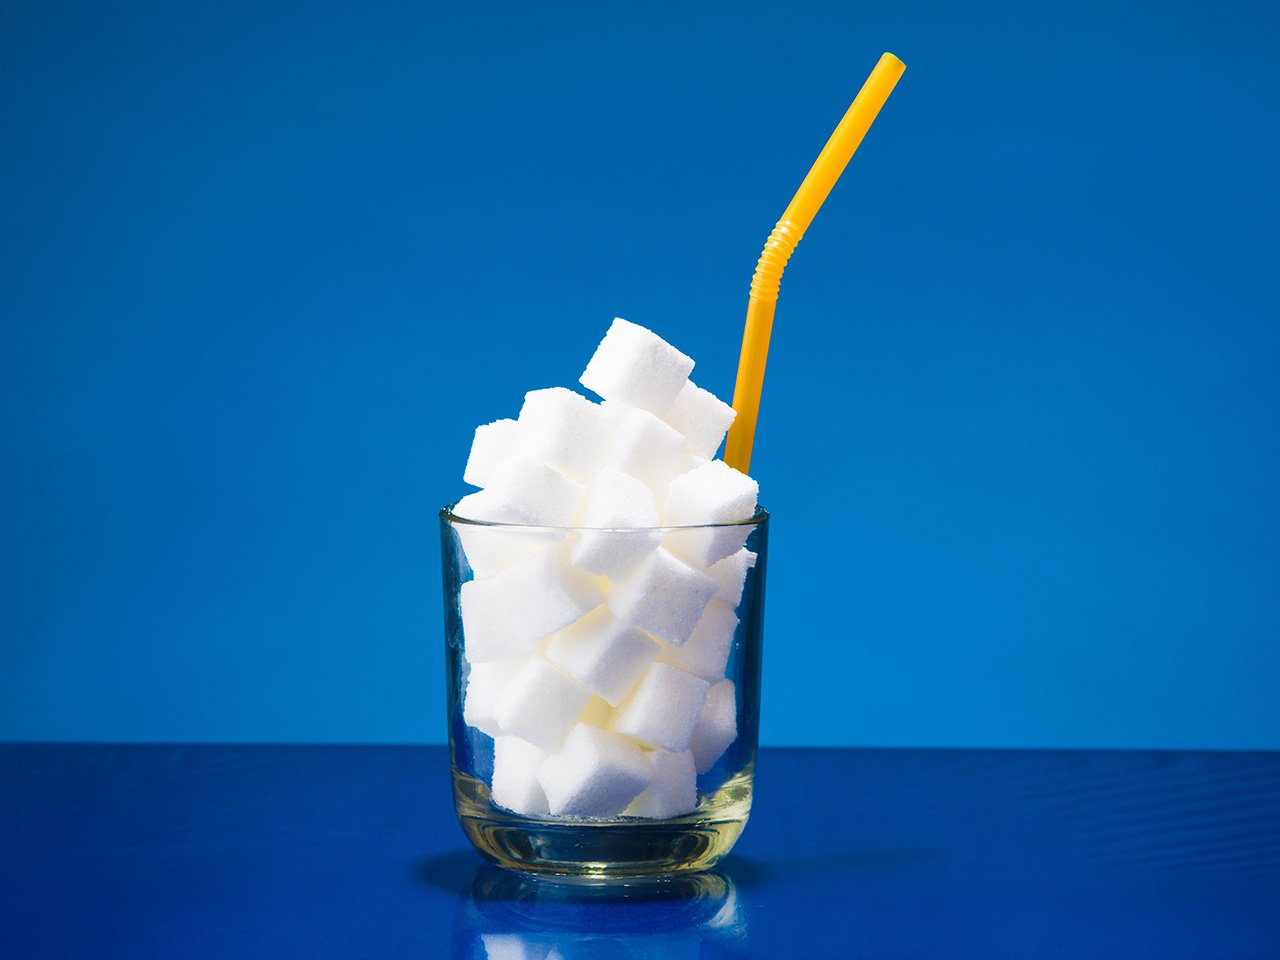 Sugar and diabetes: What you should know